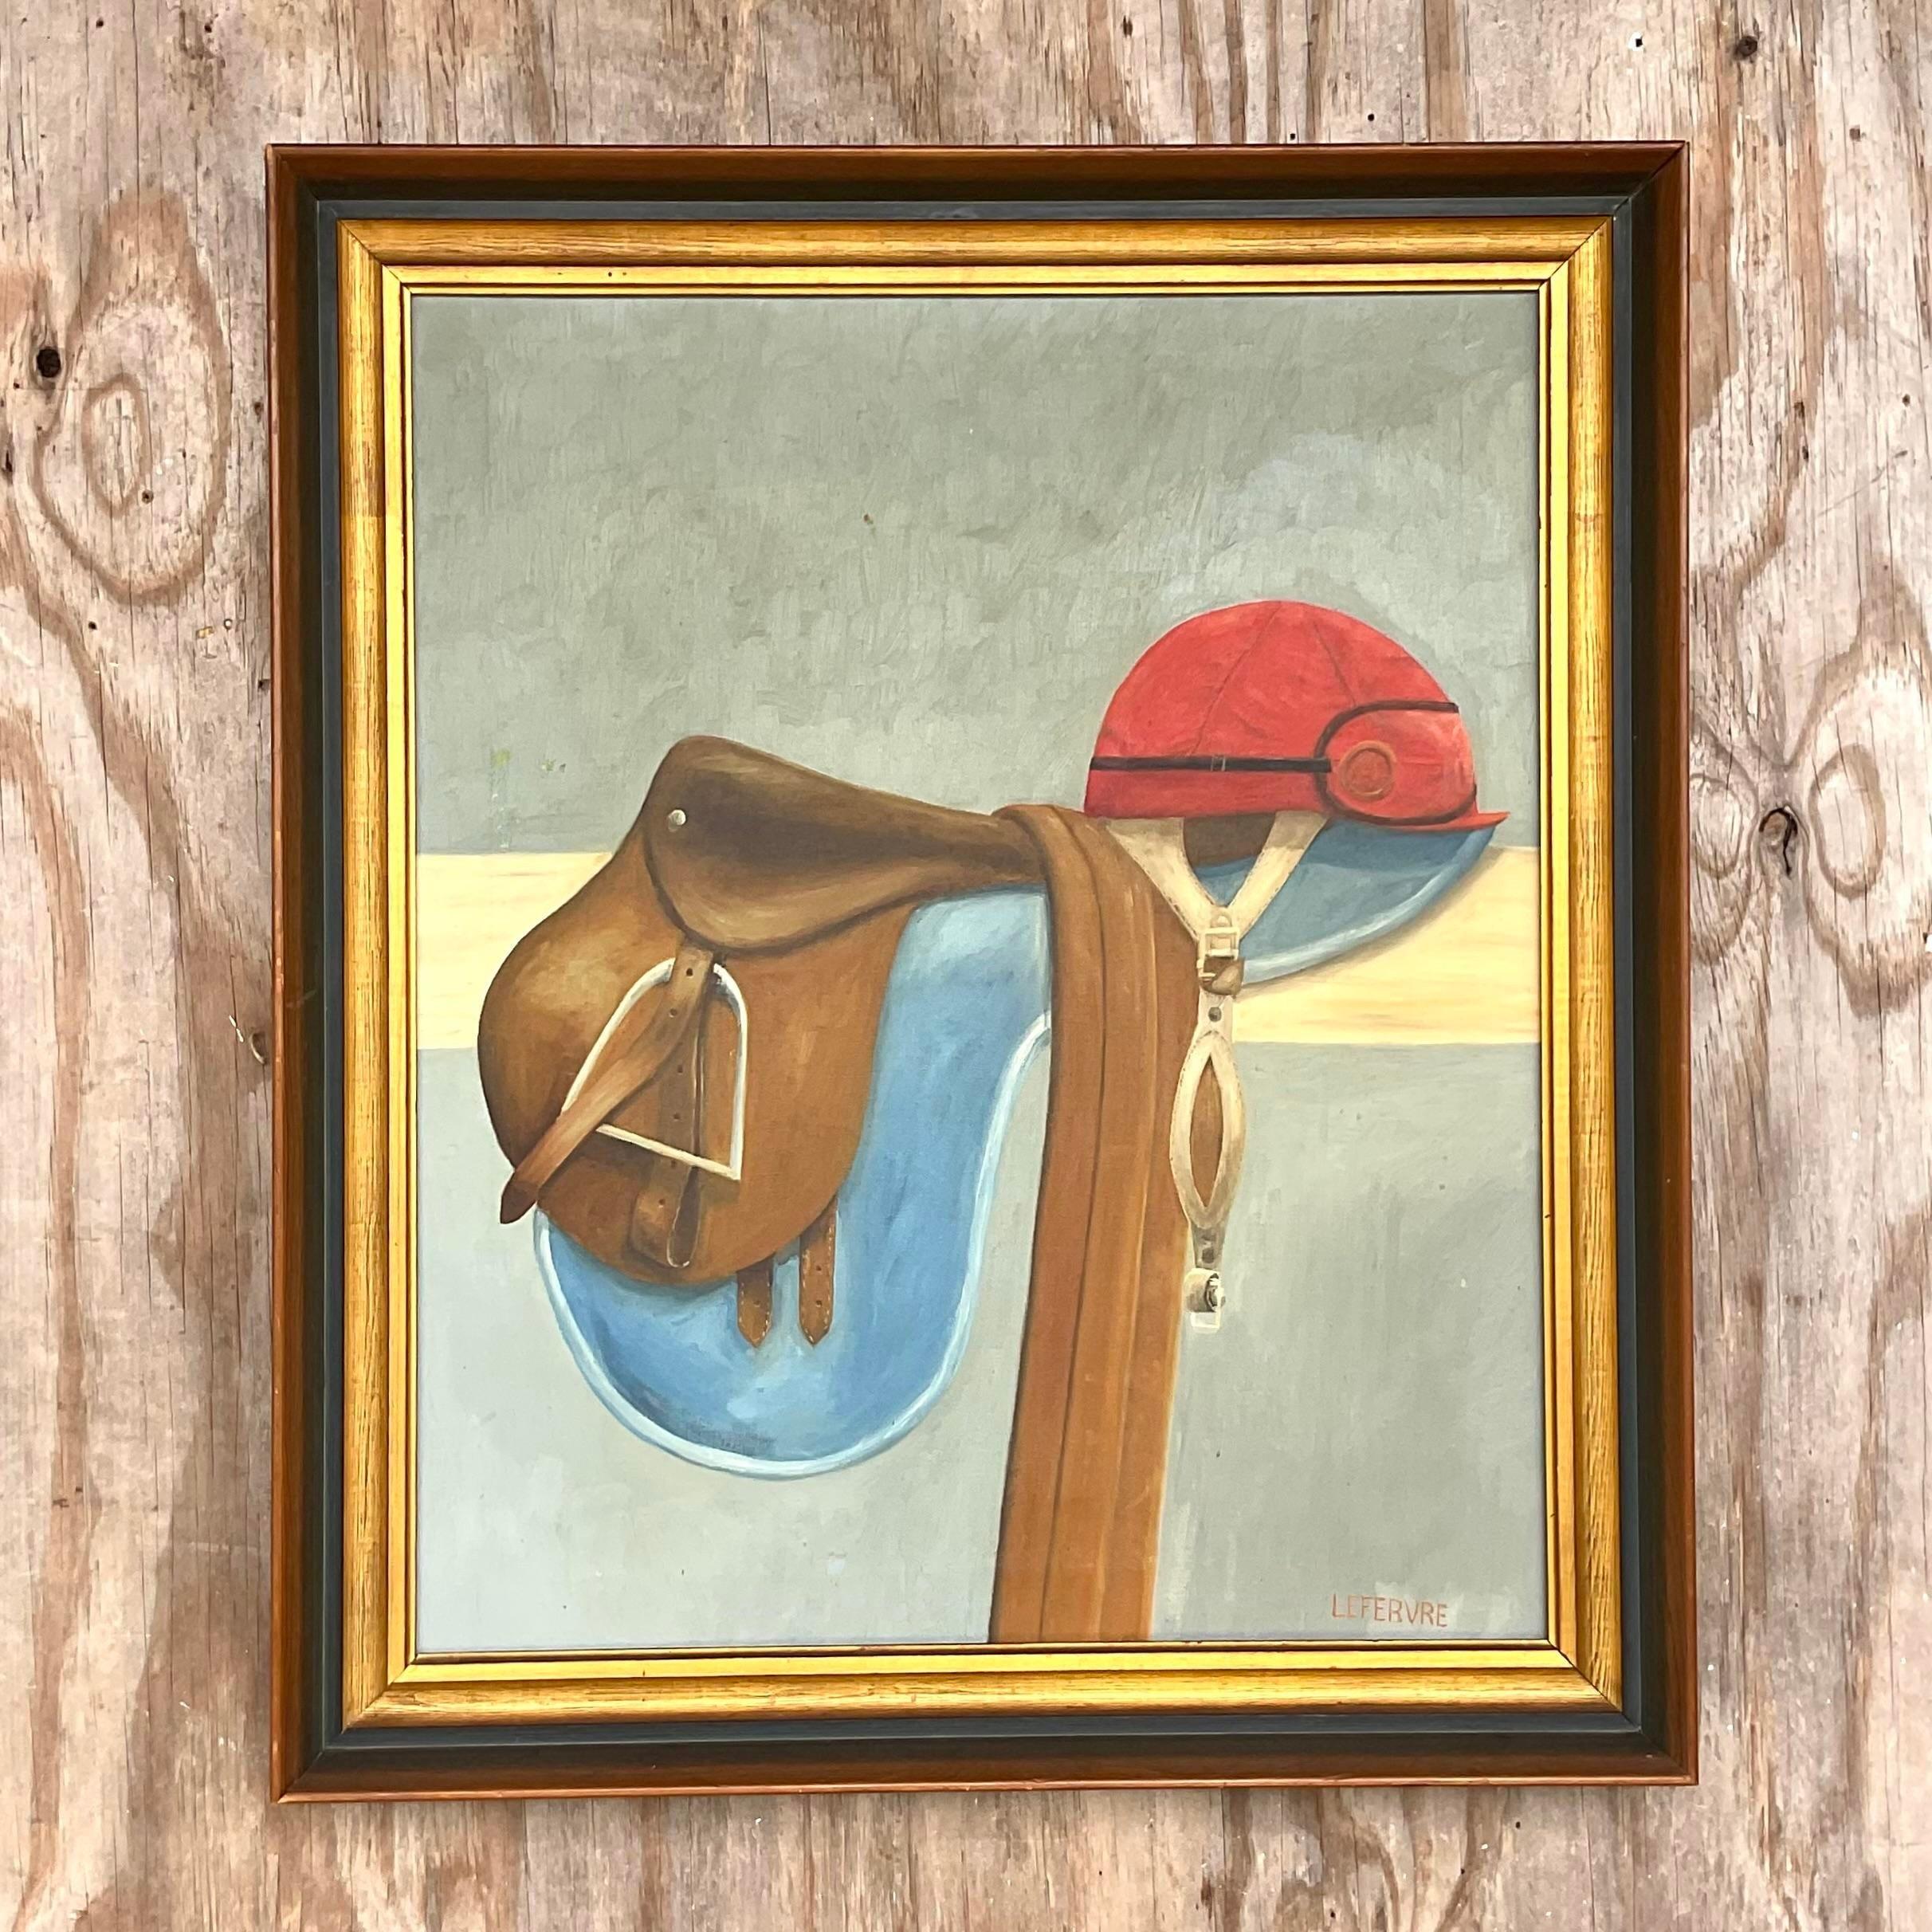 20th Century Vintage Boho Riding Gear Signed Original Oil Painting on Canvas